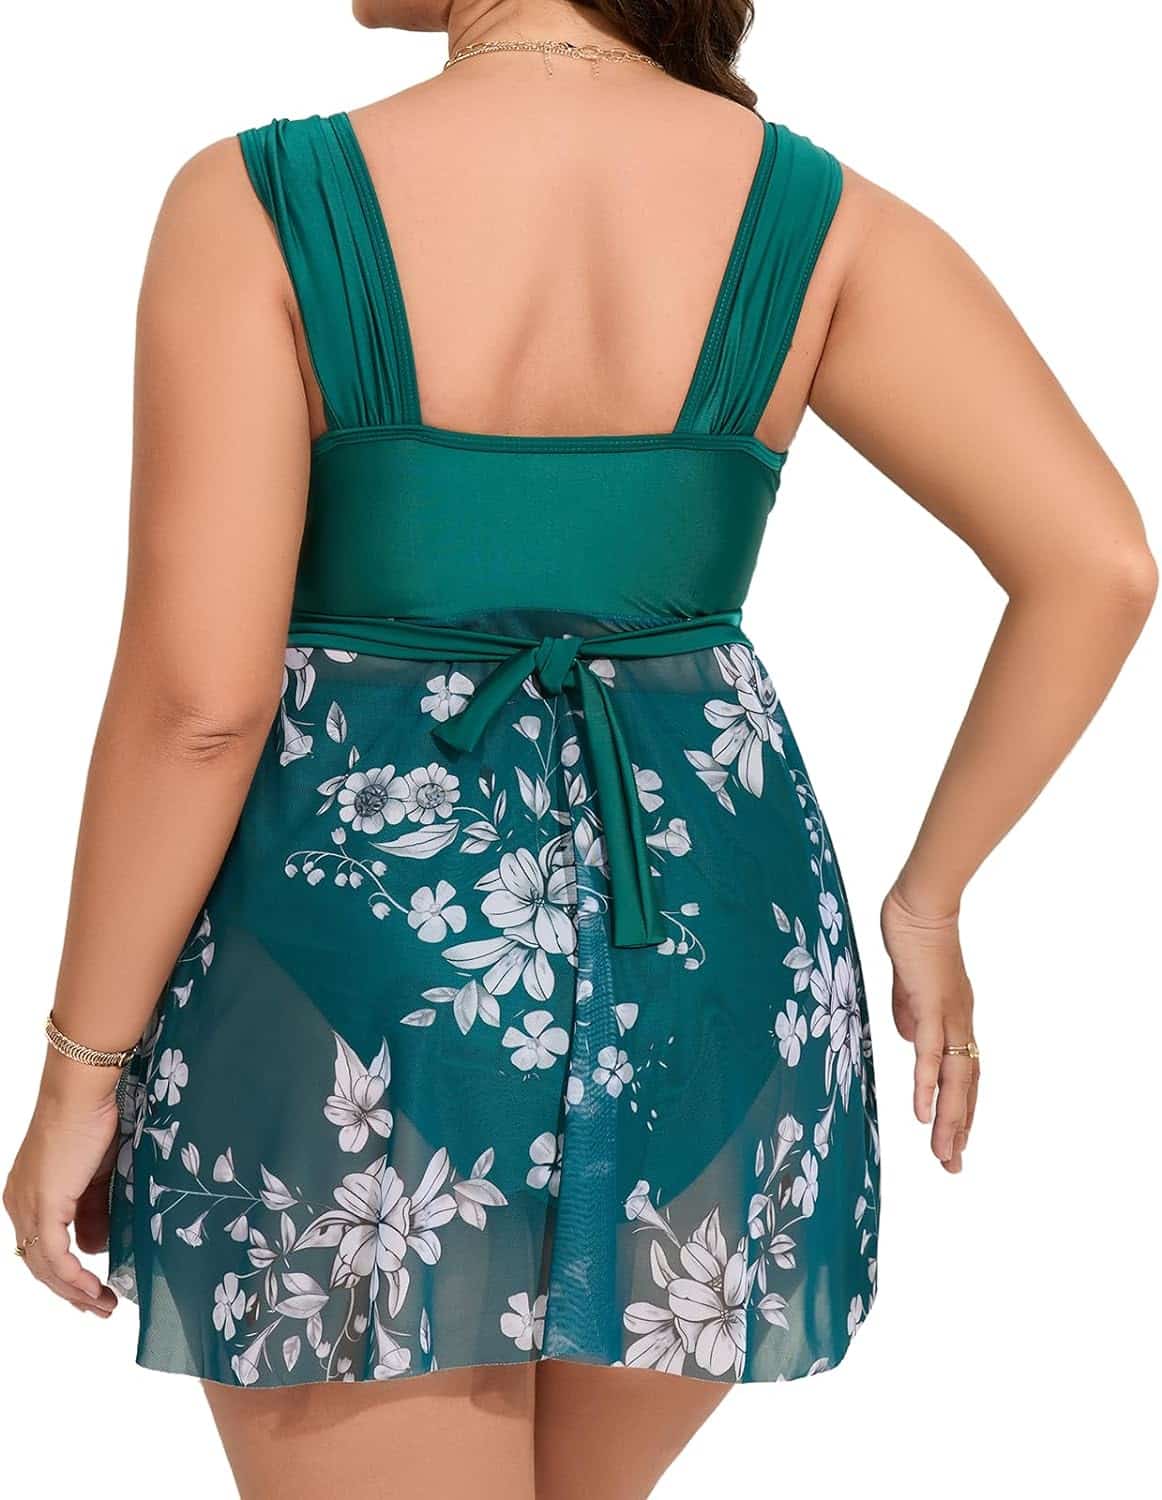 FINIZO Women Plus Size One Piece Swimsuits with Skirt: A Flattering and Stylish Swimdress Review